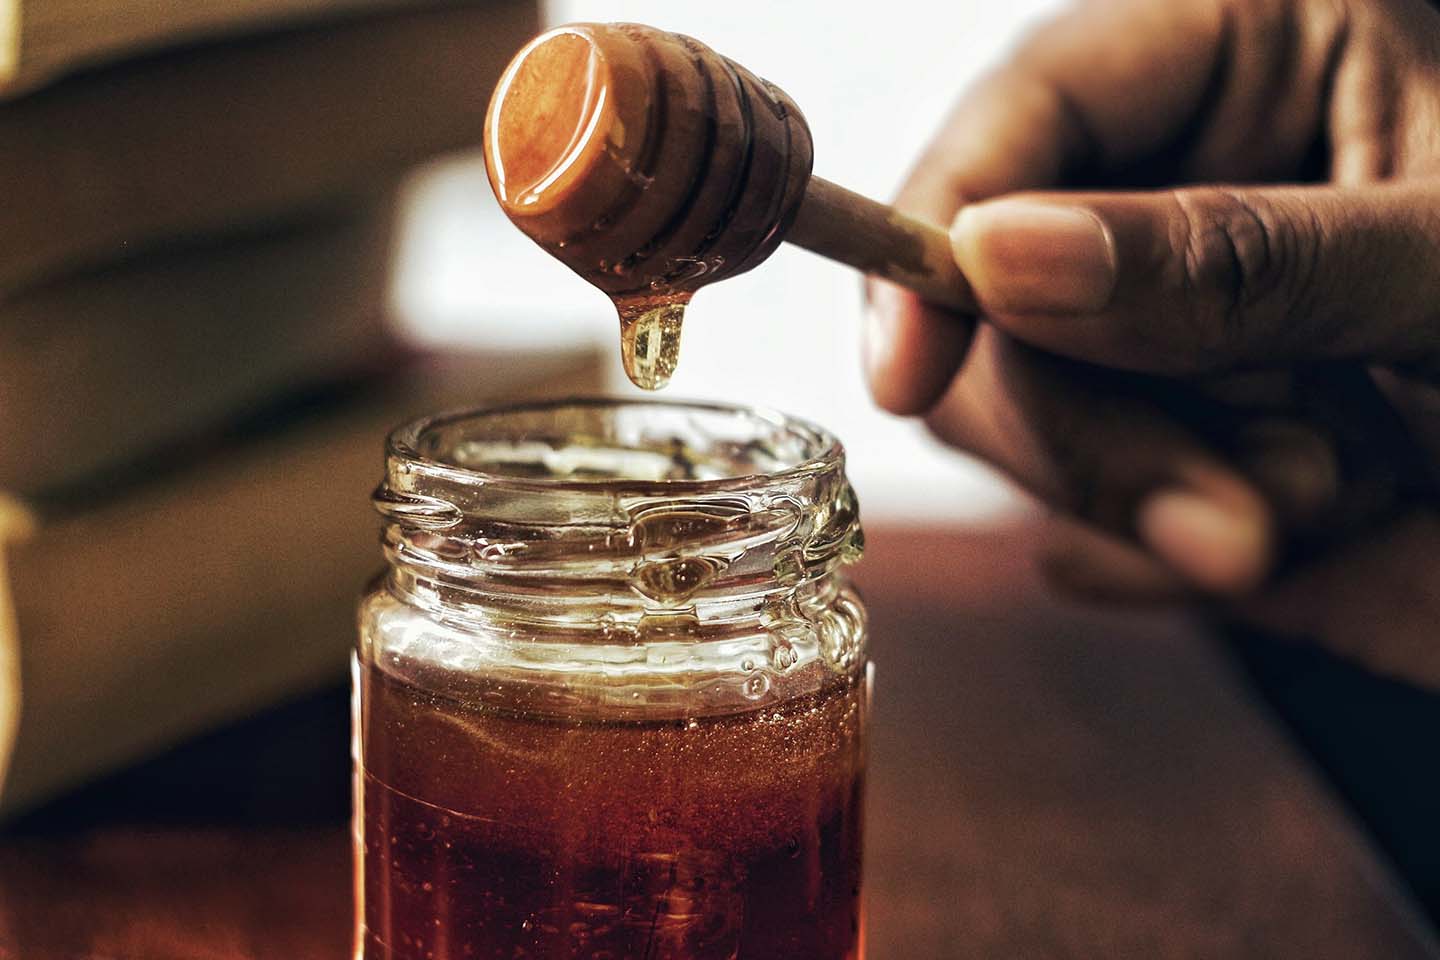 a hand holding up a honey dipper over a jar filled with amber syrup